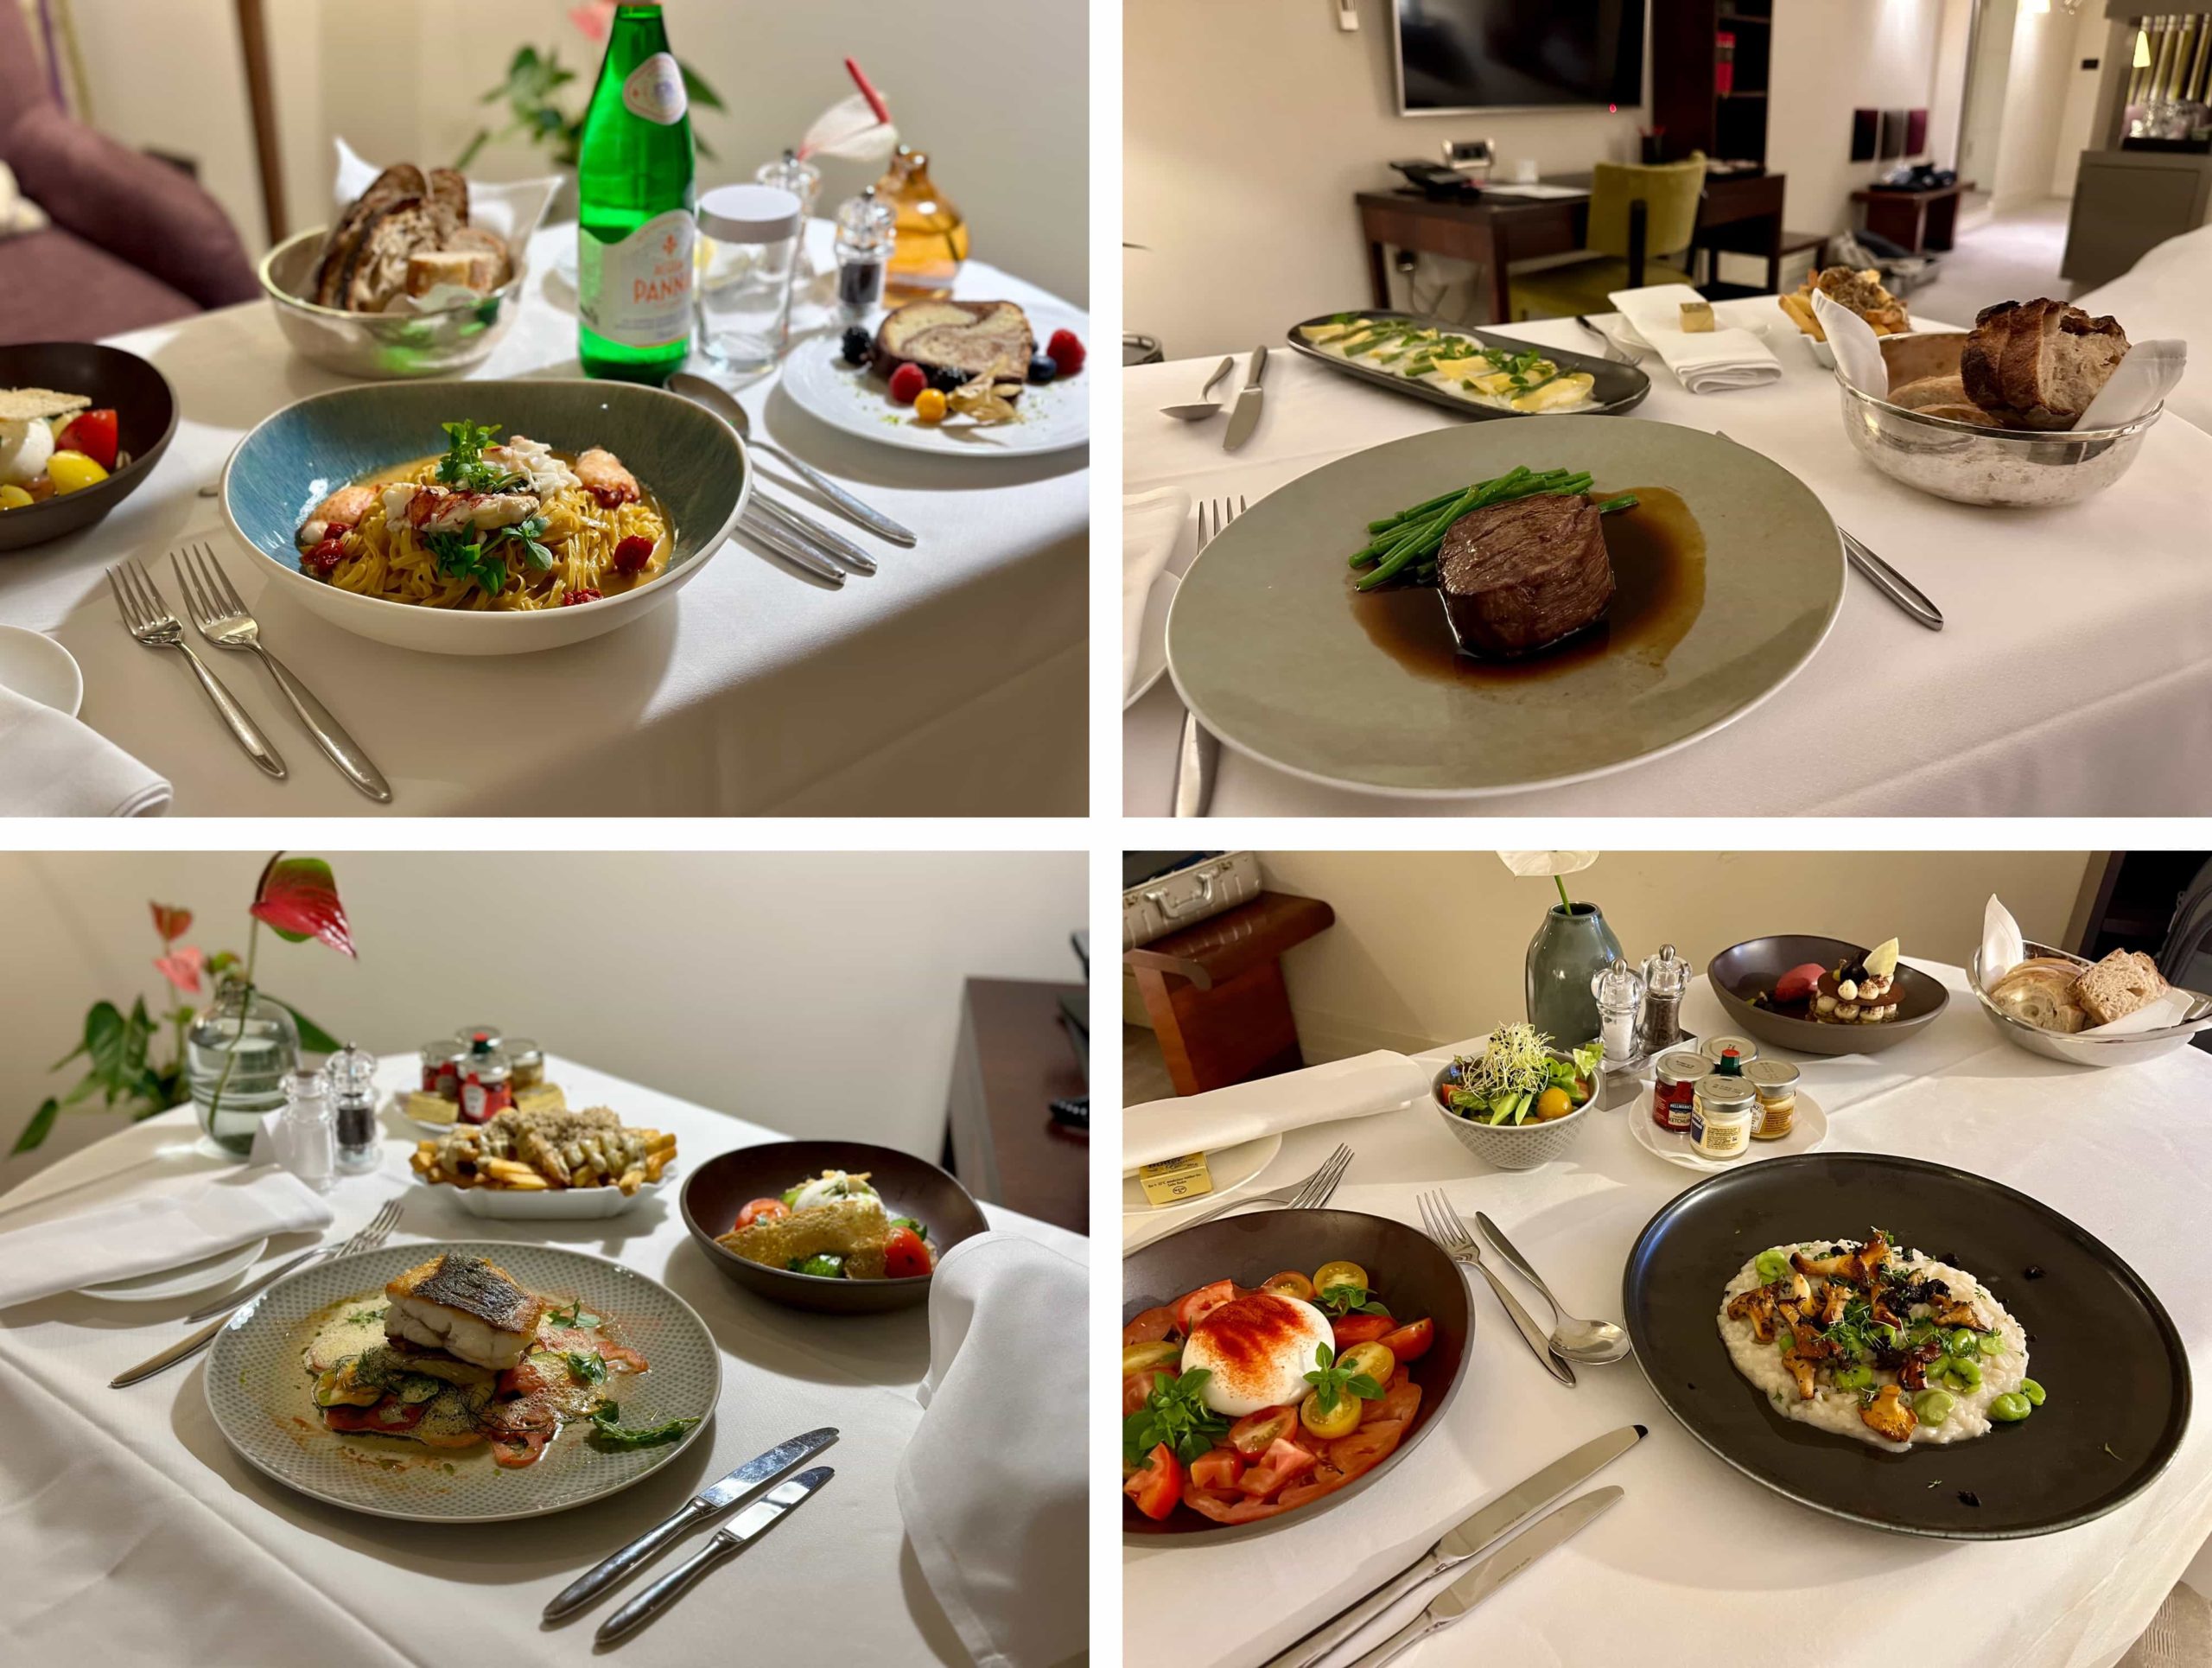 Four examples of room service offerings, including steak, risotto, tagliatelle, and salmon